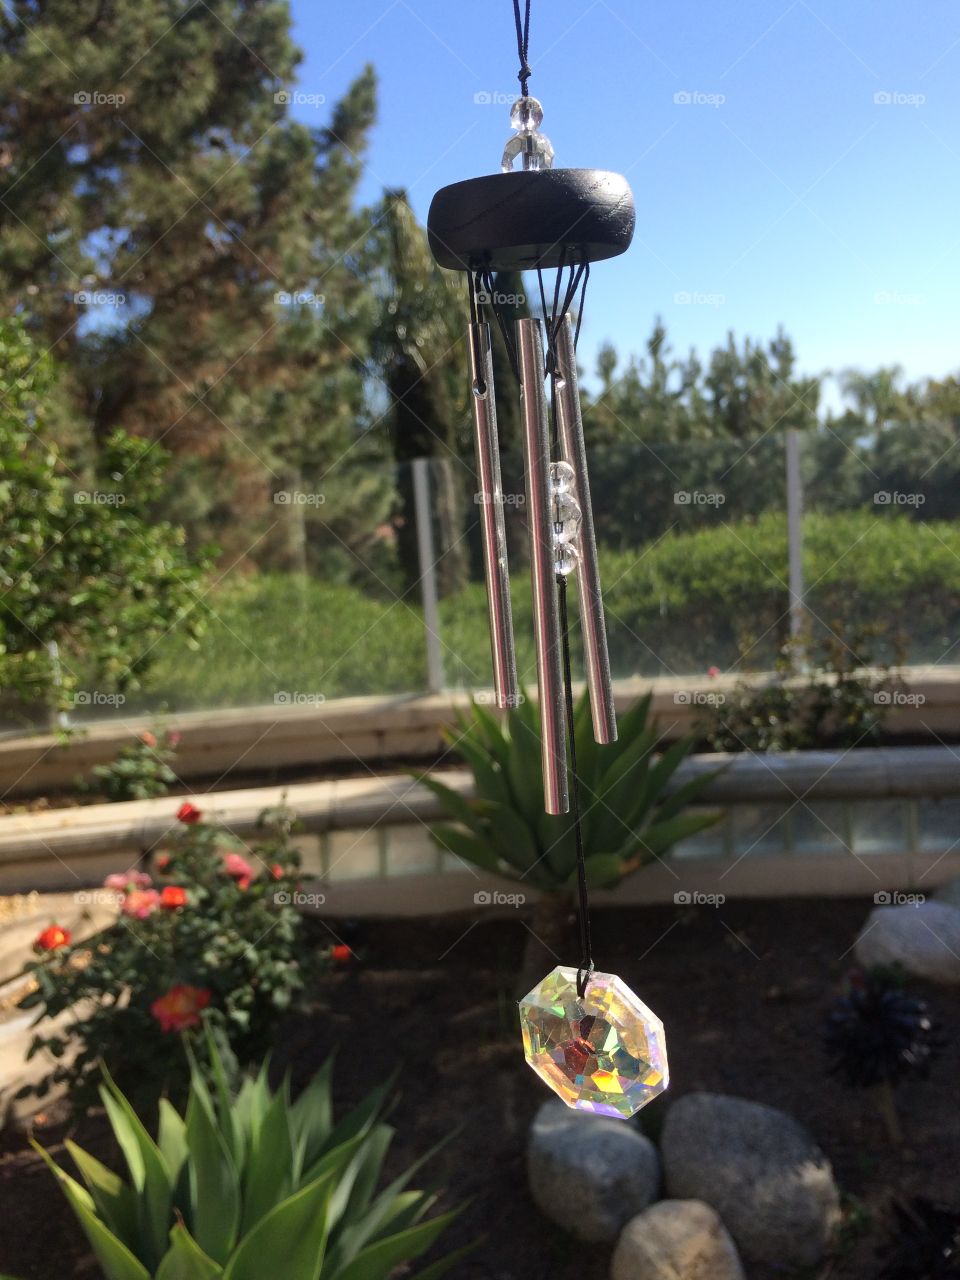 Crystal wind chime